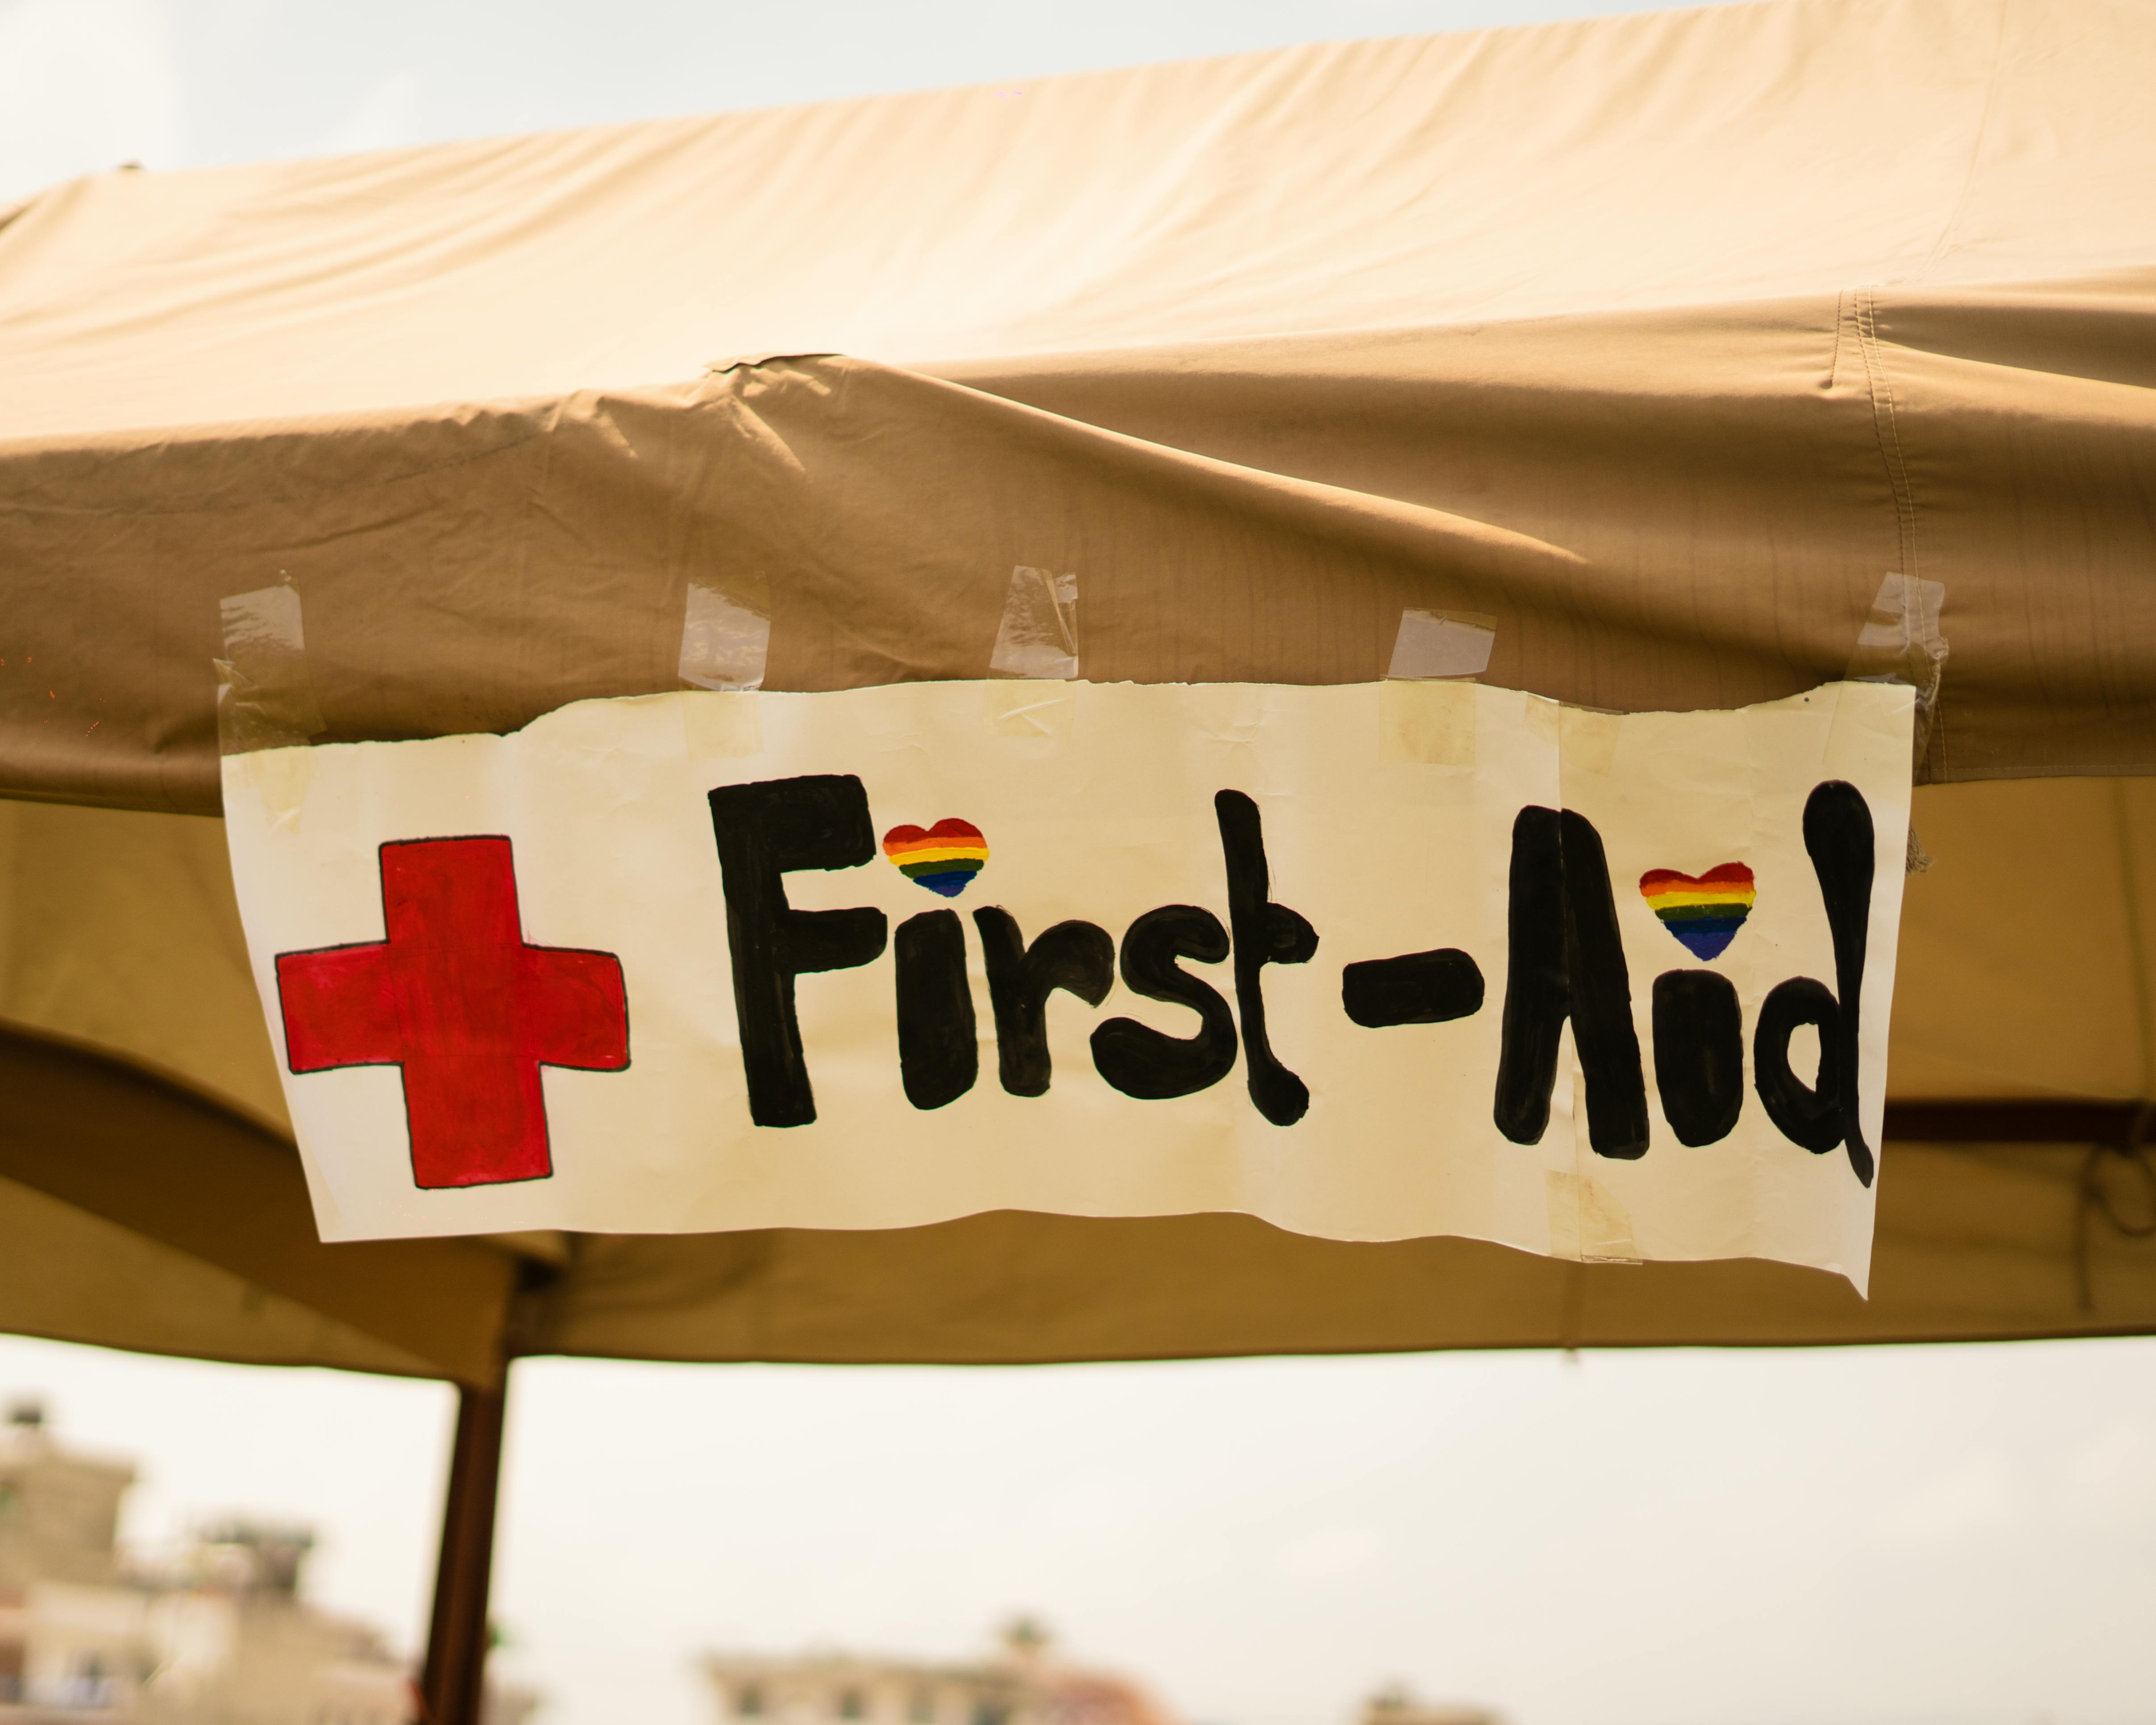 First Aid Banner in a Tent